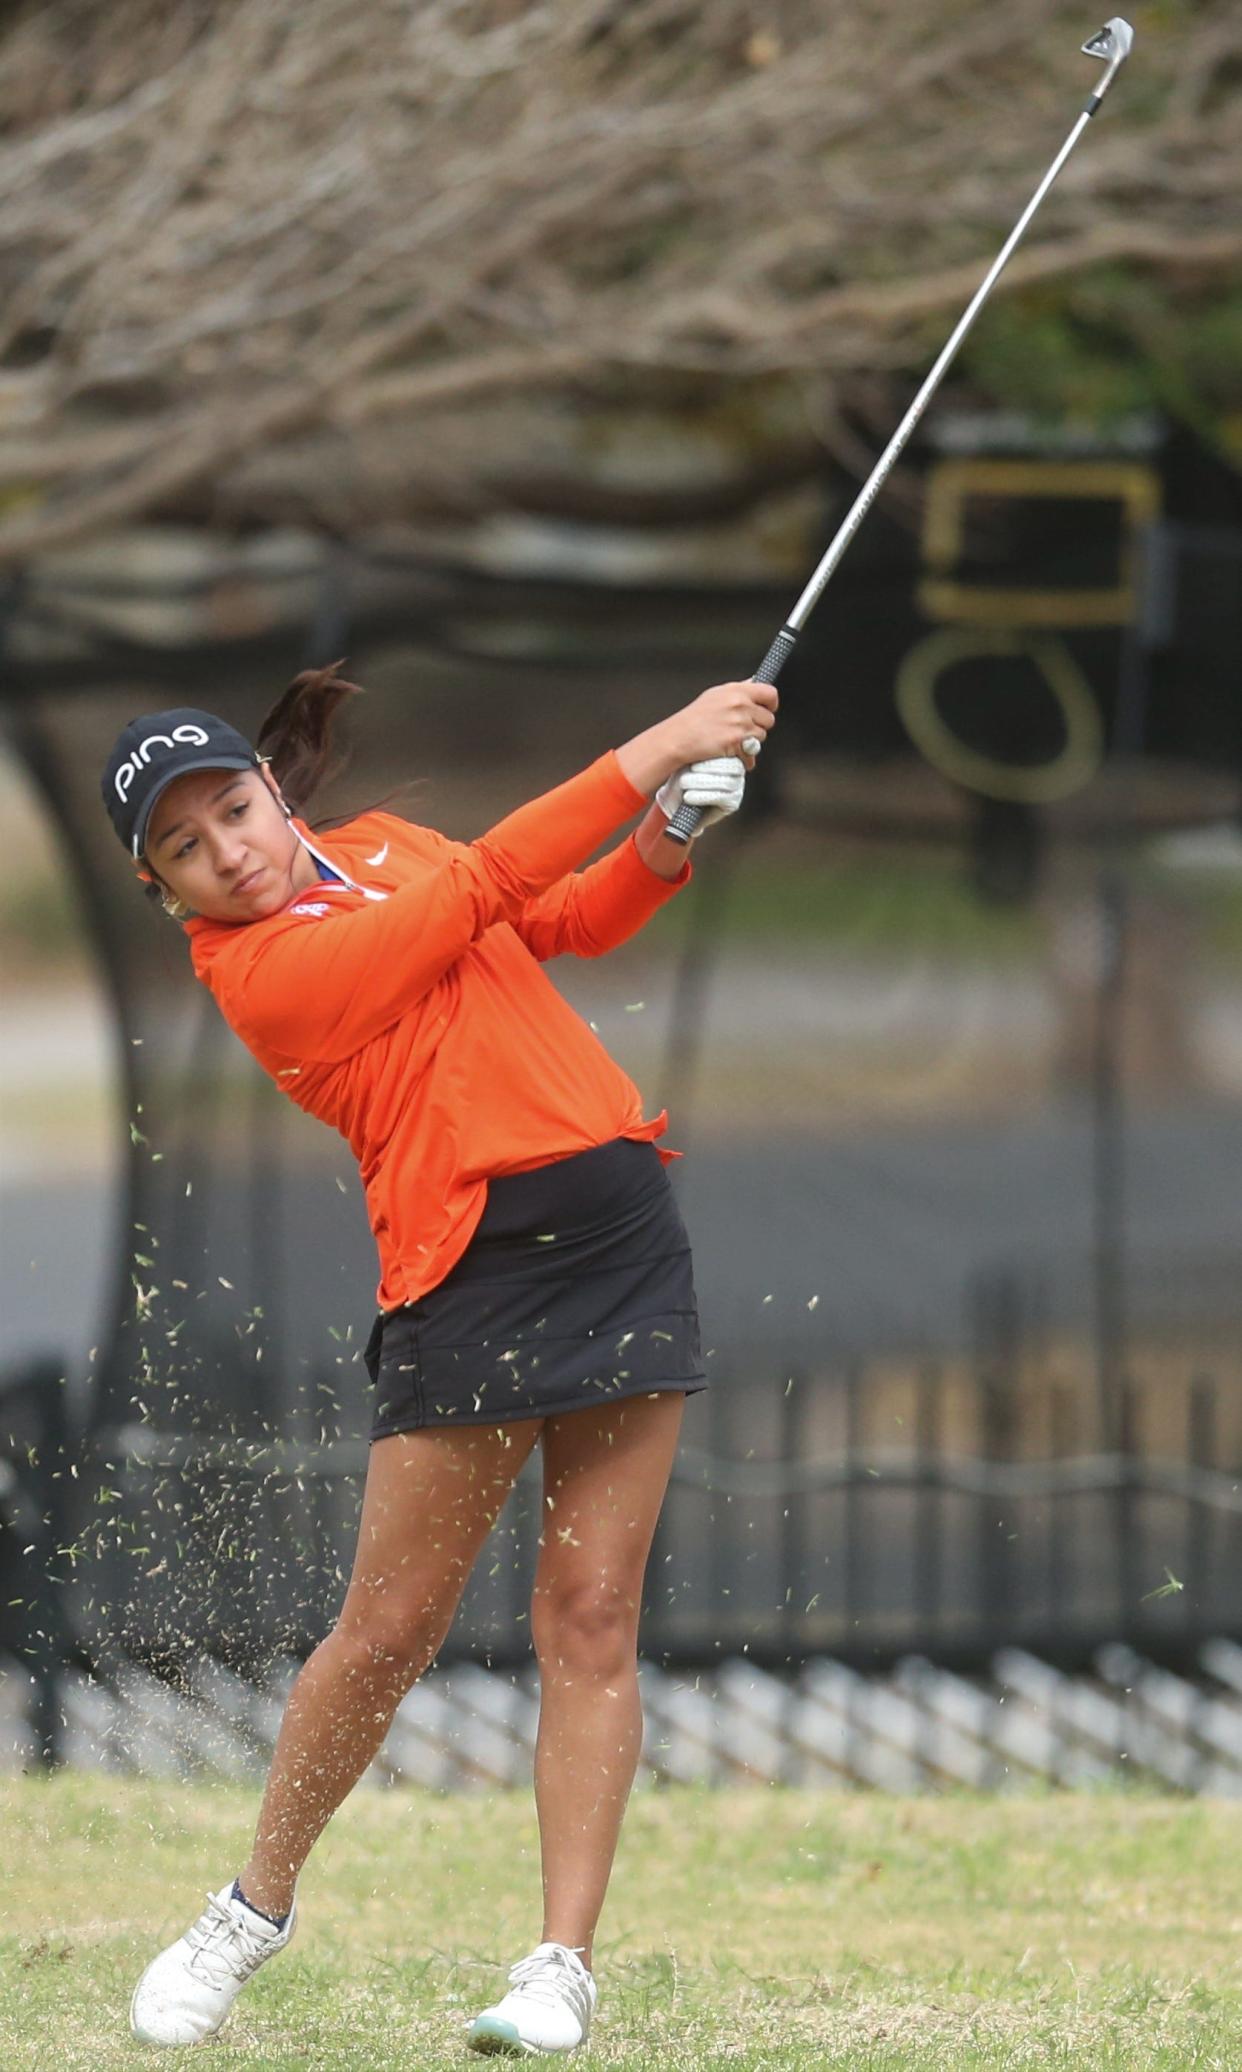 San Angelo Central High School's Emily Coronado hits a tee shot during the final round of the District 2-6A Girls Golf Tournament at Bentwood Country Club on Tuesday, March 29, 2022.